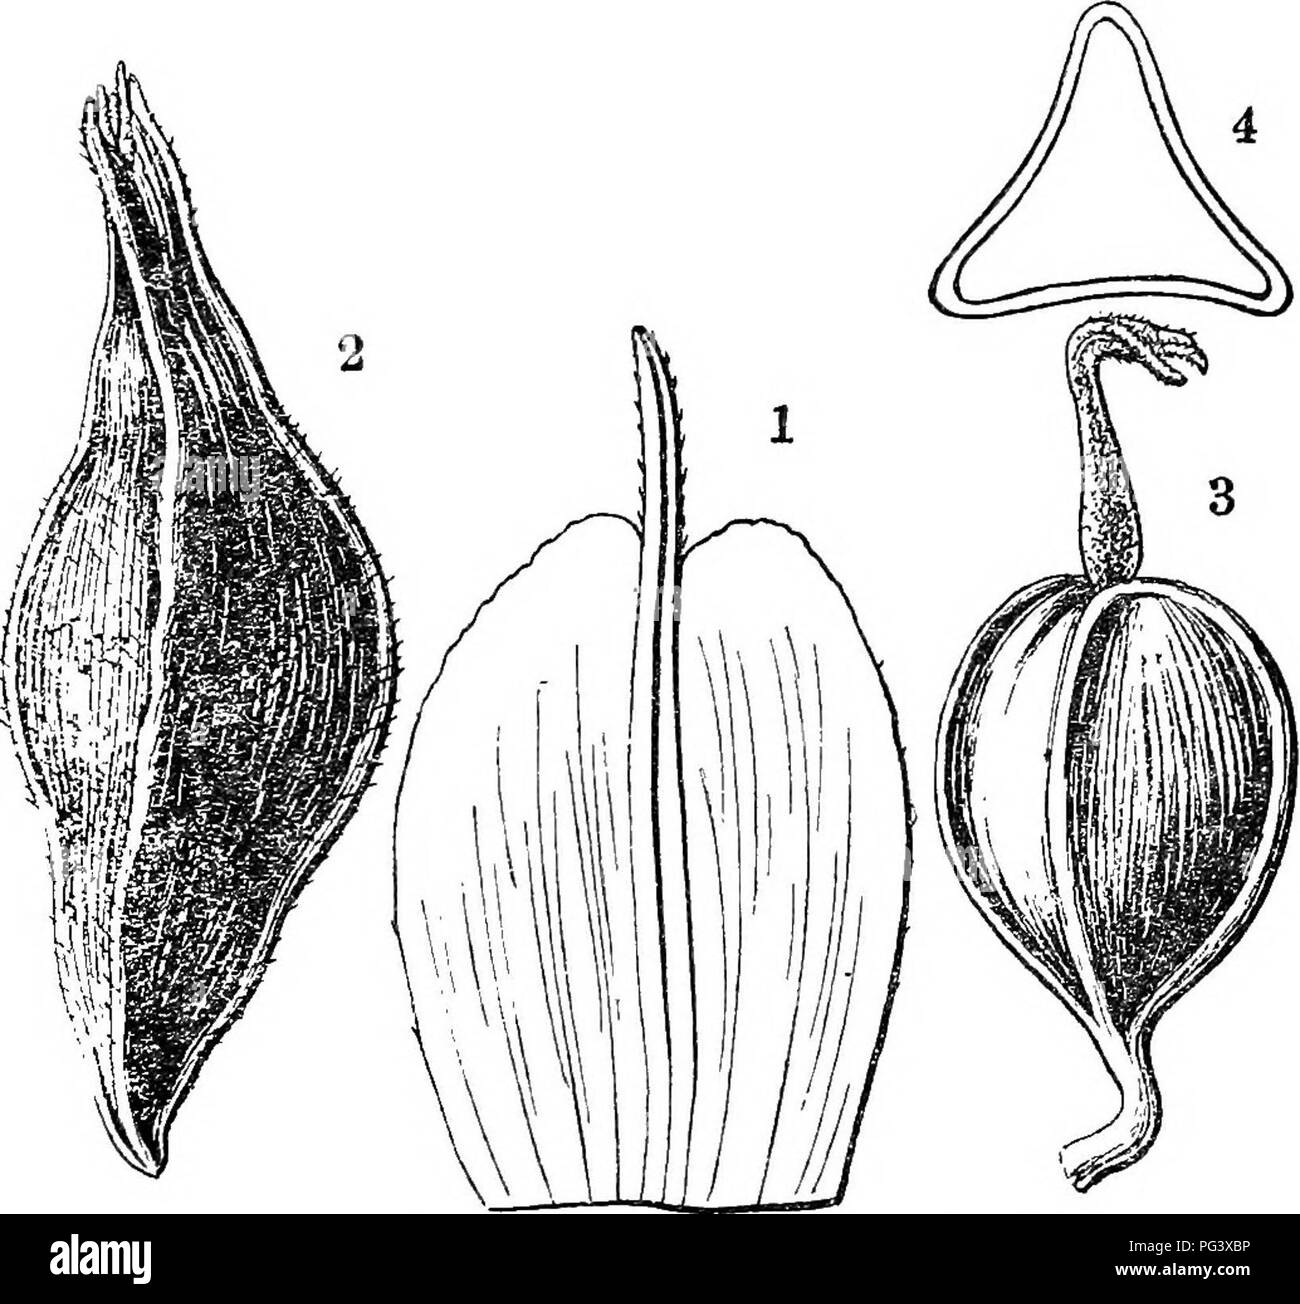 . Icones plantarum formosanarum nec non et contributiones ad floram formosanam; or, Icones of the plants of Formosa, and materials for a flora of the island, based on a study of the collections of the Botanical survey of the Government of Formosa. Botany. CYPERACE^. 69 ^pice rostratus, ore 2-fido glabro. Nucula obovoideo-fusiformis 3 mm. longa 1mm. lata glabra 3-quefcra laevis. Hab. Arisan, ad 2500 ped. alt., leg. U. Faueie, Jun. 1914. Near Carex daisenensis Nakai, but differs from it in the quite glabrous utricles. Carex sharyotensis Hayata sp. nov. (Fig. 46). Folia linearia 40-50 cm. Jonga 3 Stock Photo